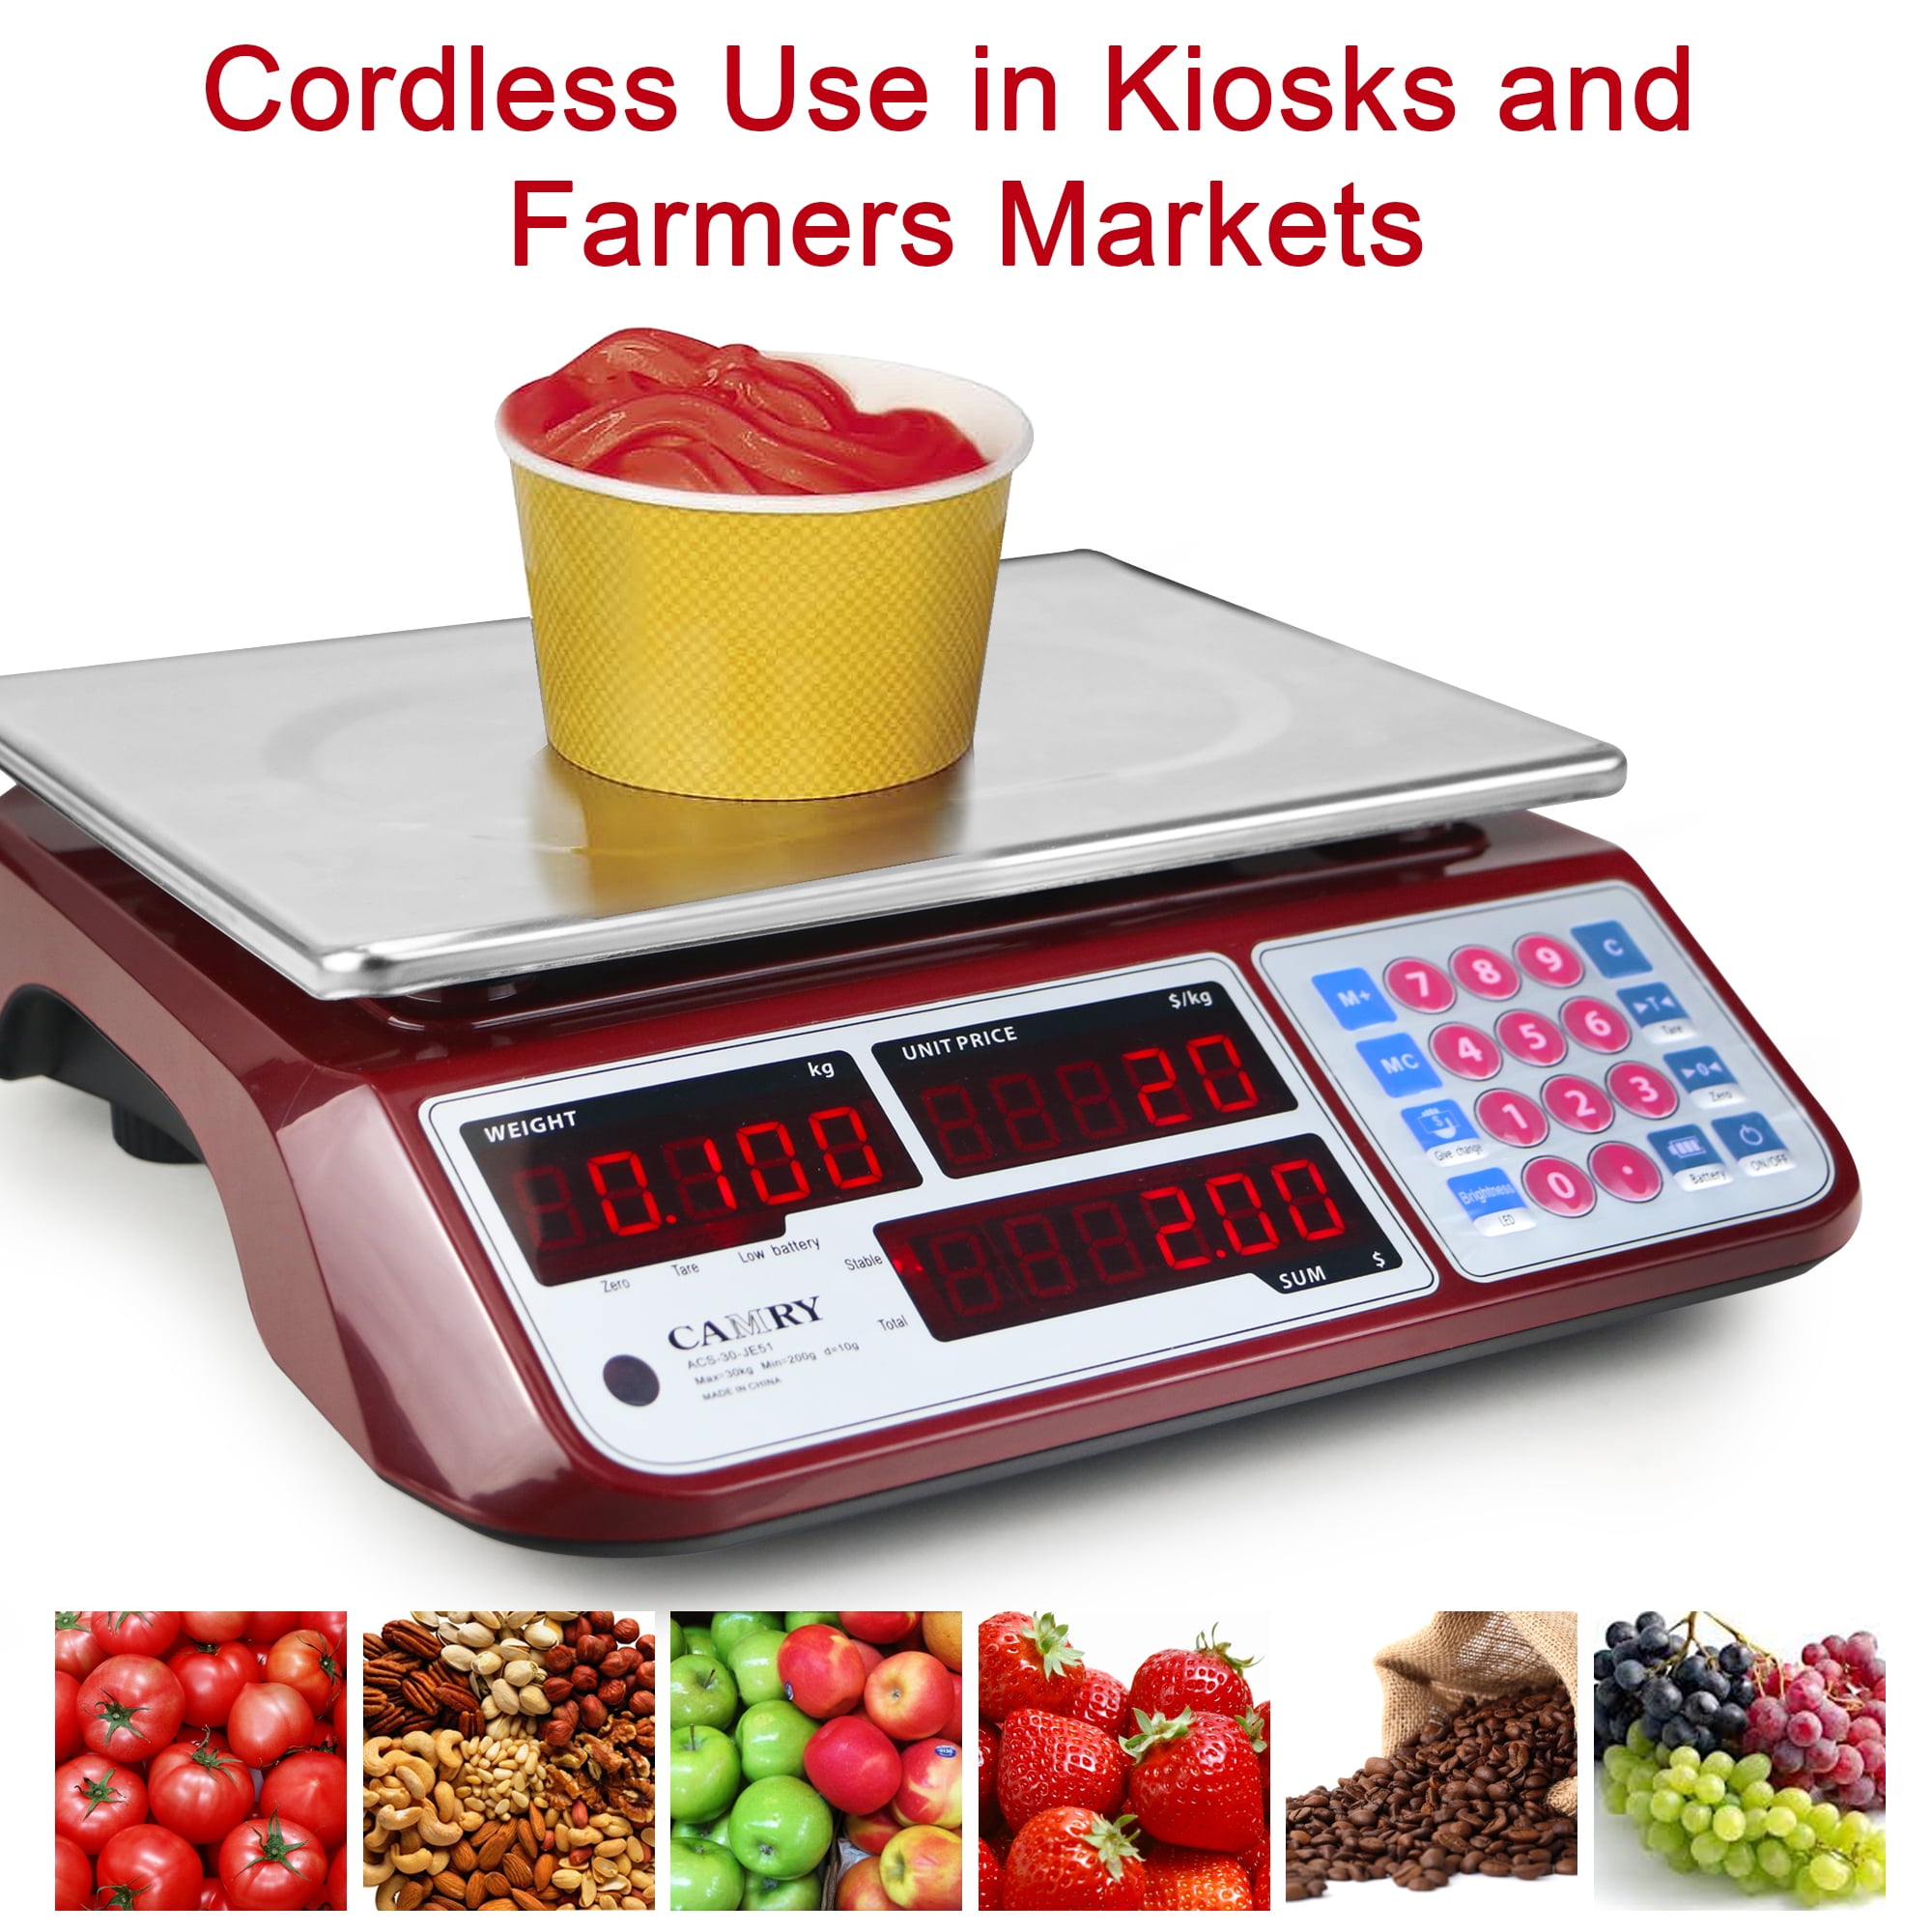  CAMRY Digital Food Scale 66lb / 30kg Commercial Food Meat Fruit  Produce Price Computing Scale for Farmers Market, Meat Shop, Deli, Retail  Outlets: Home & Kitchen